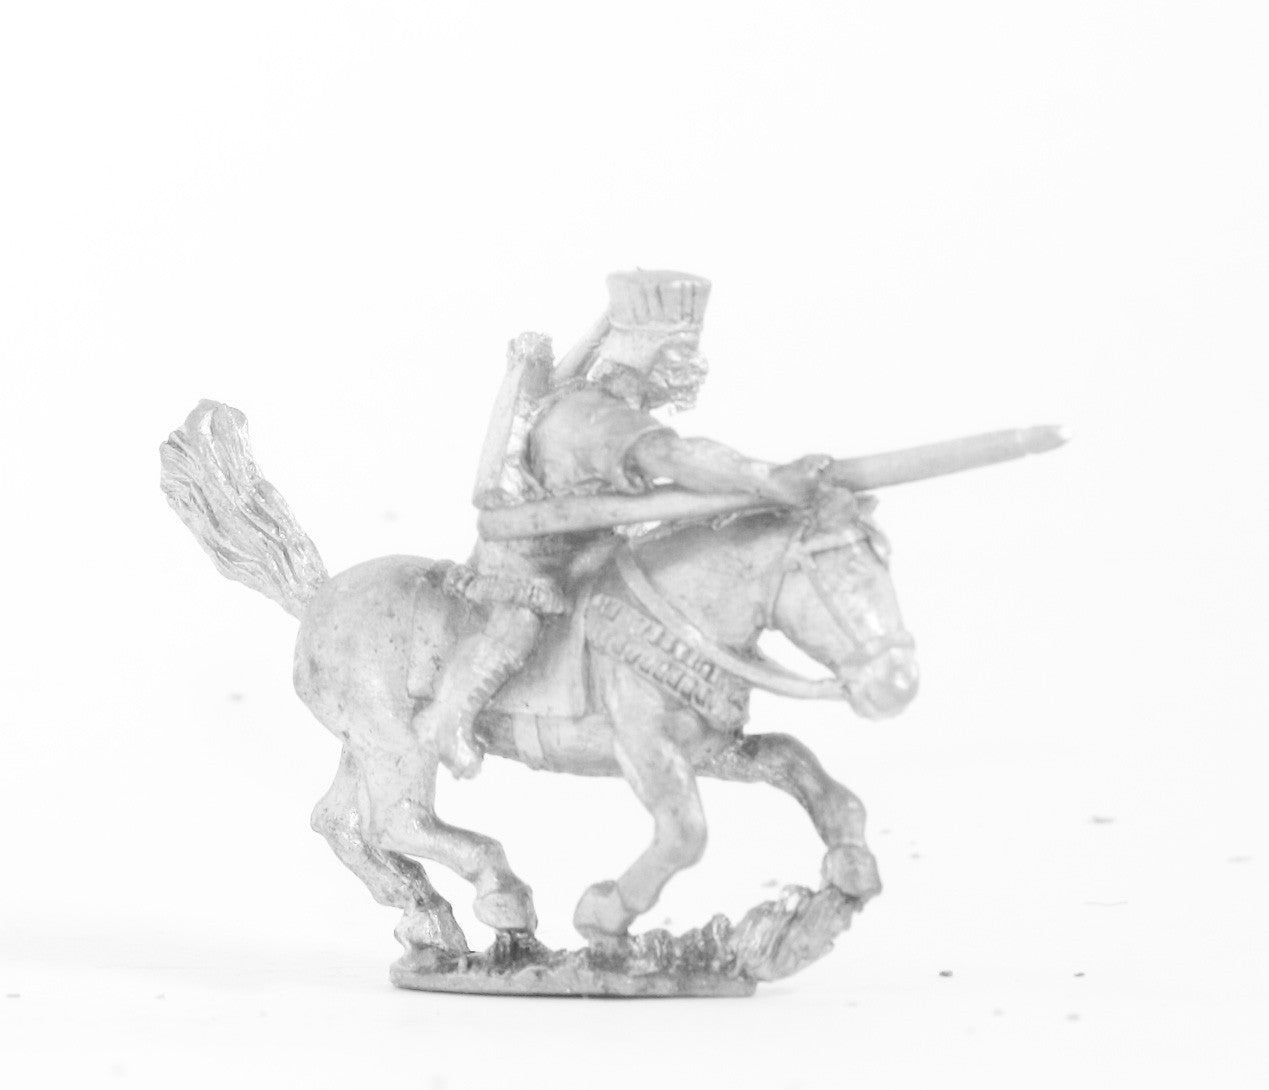 New Assyrian Empire Mannean Heavy Cavalry with Lance and Bow BS81